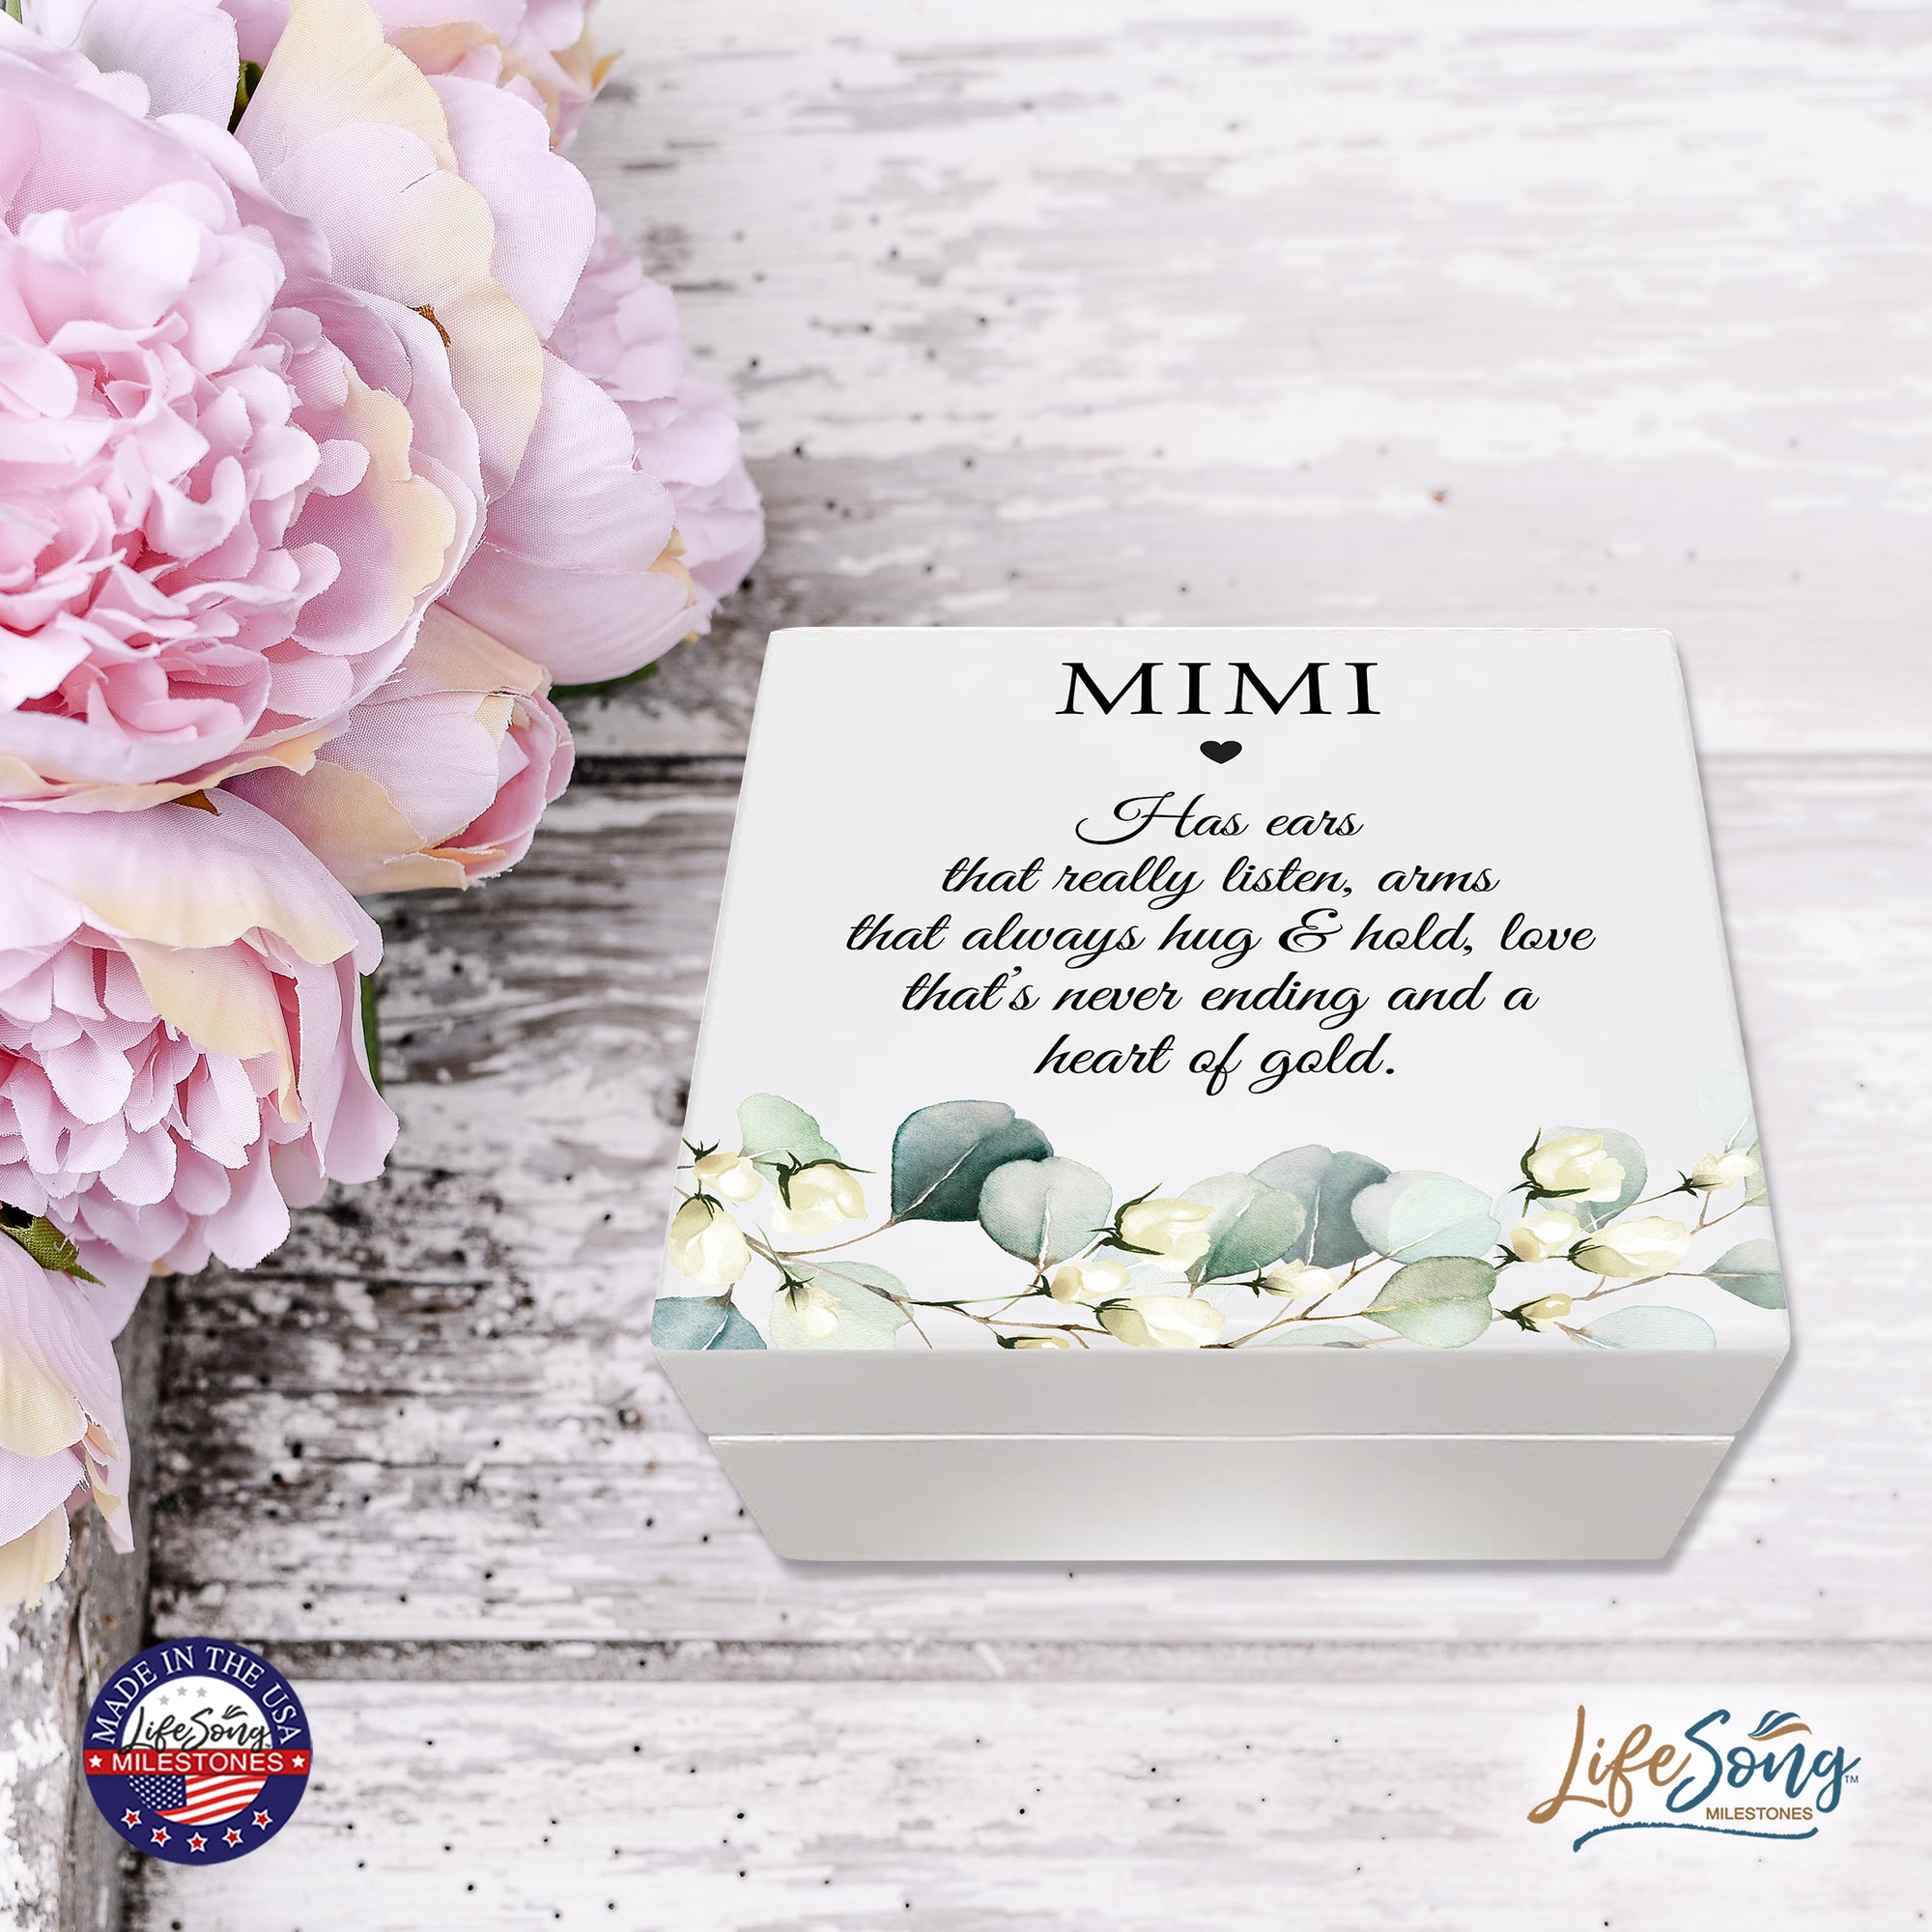 LifeSong Milestones Modern Inspirational White Jewelry Keepsake Box for Mimi 6x5.5 - A Heart of Gold. Housewarming keepsake gifts for your beloved Mimi. Perfect gift to hold your watches, rings, cufflinks, bracelets, necklaces & special mementos